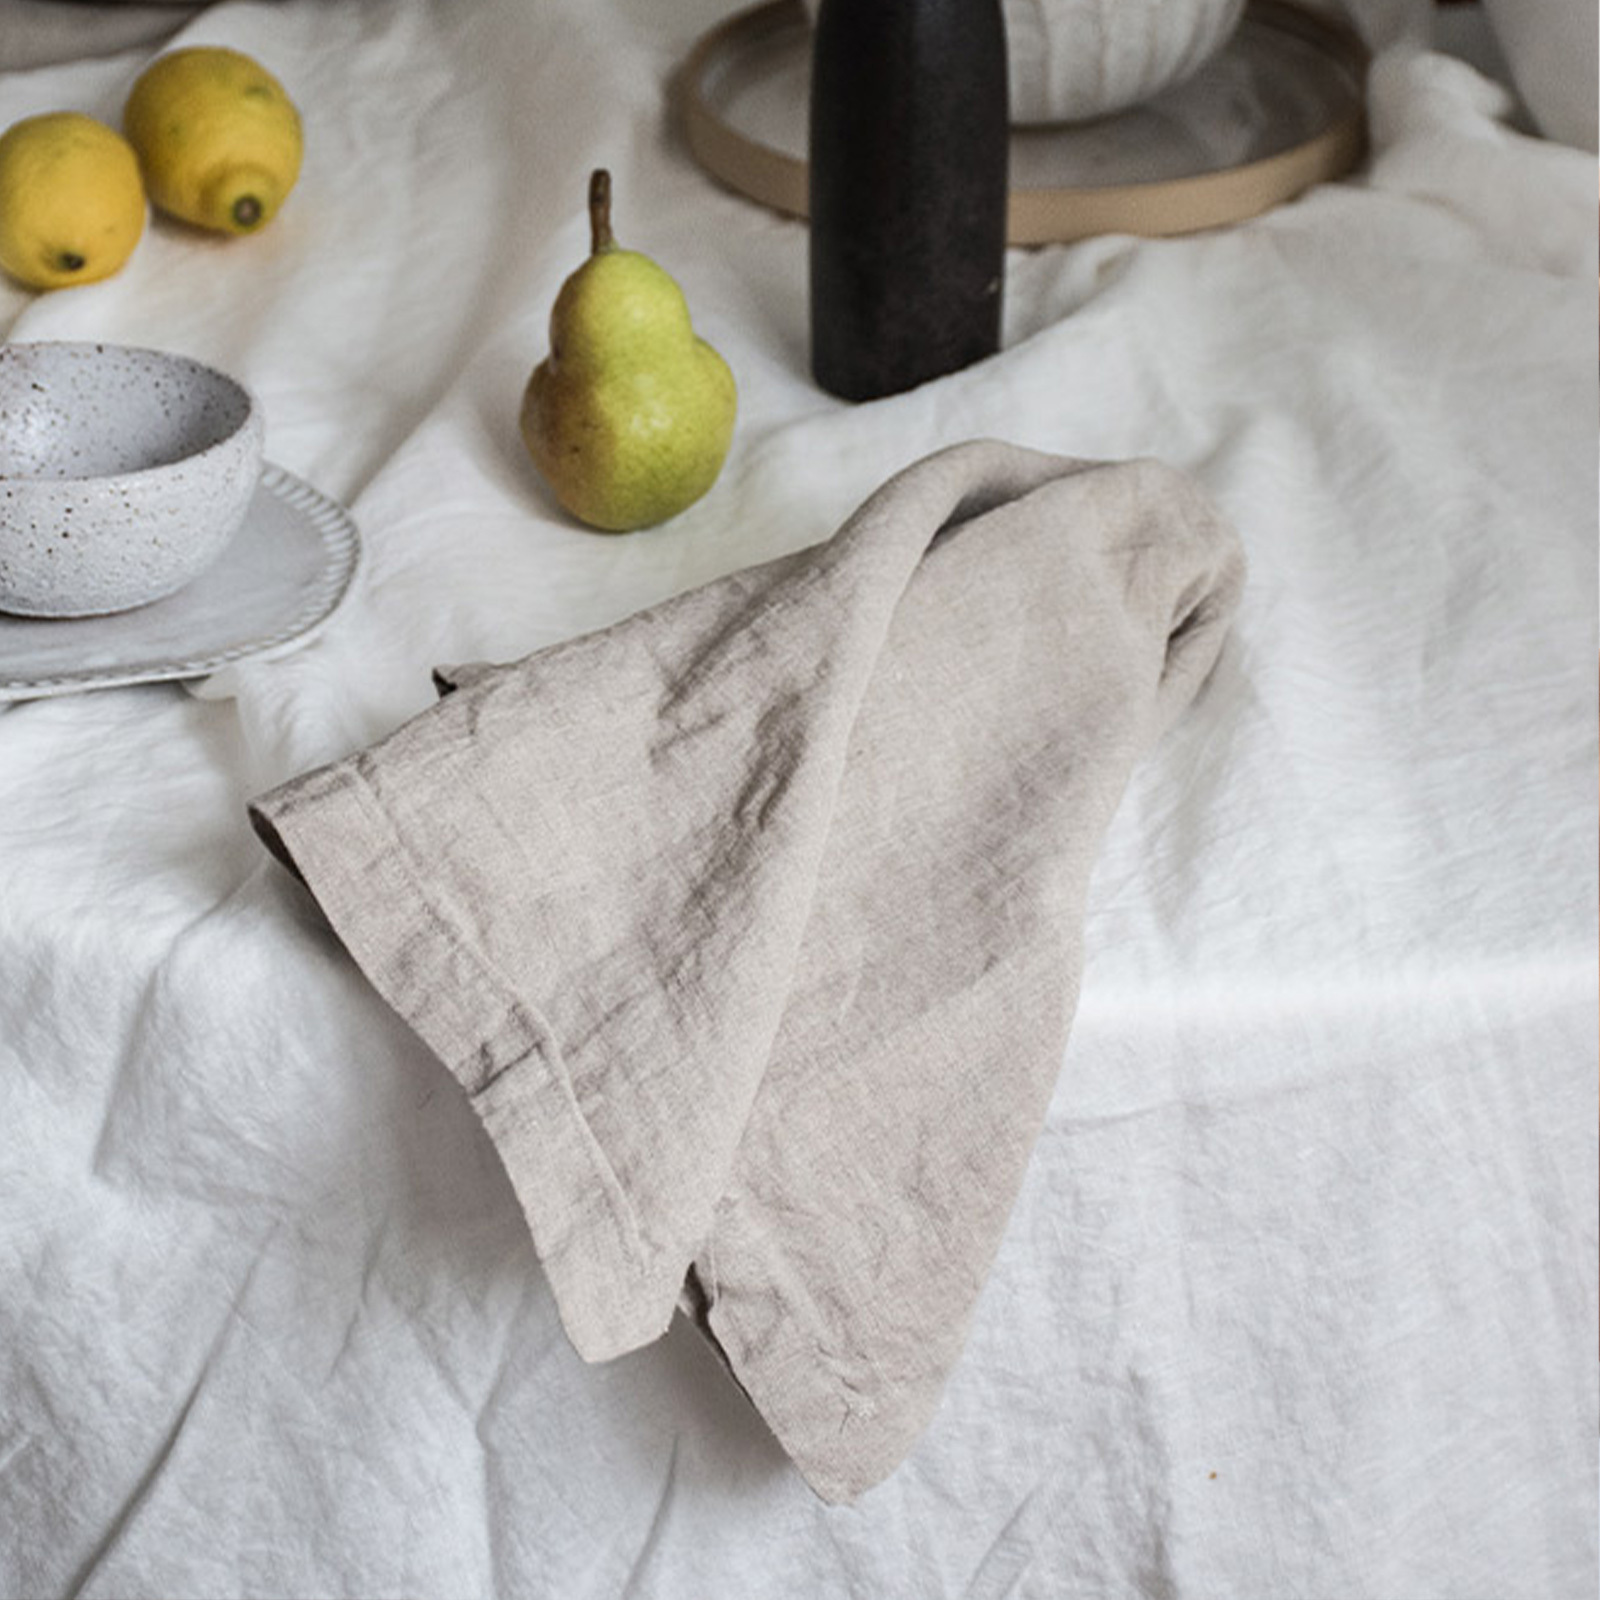 Pure French linen Napkins in Natural (set of 4)